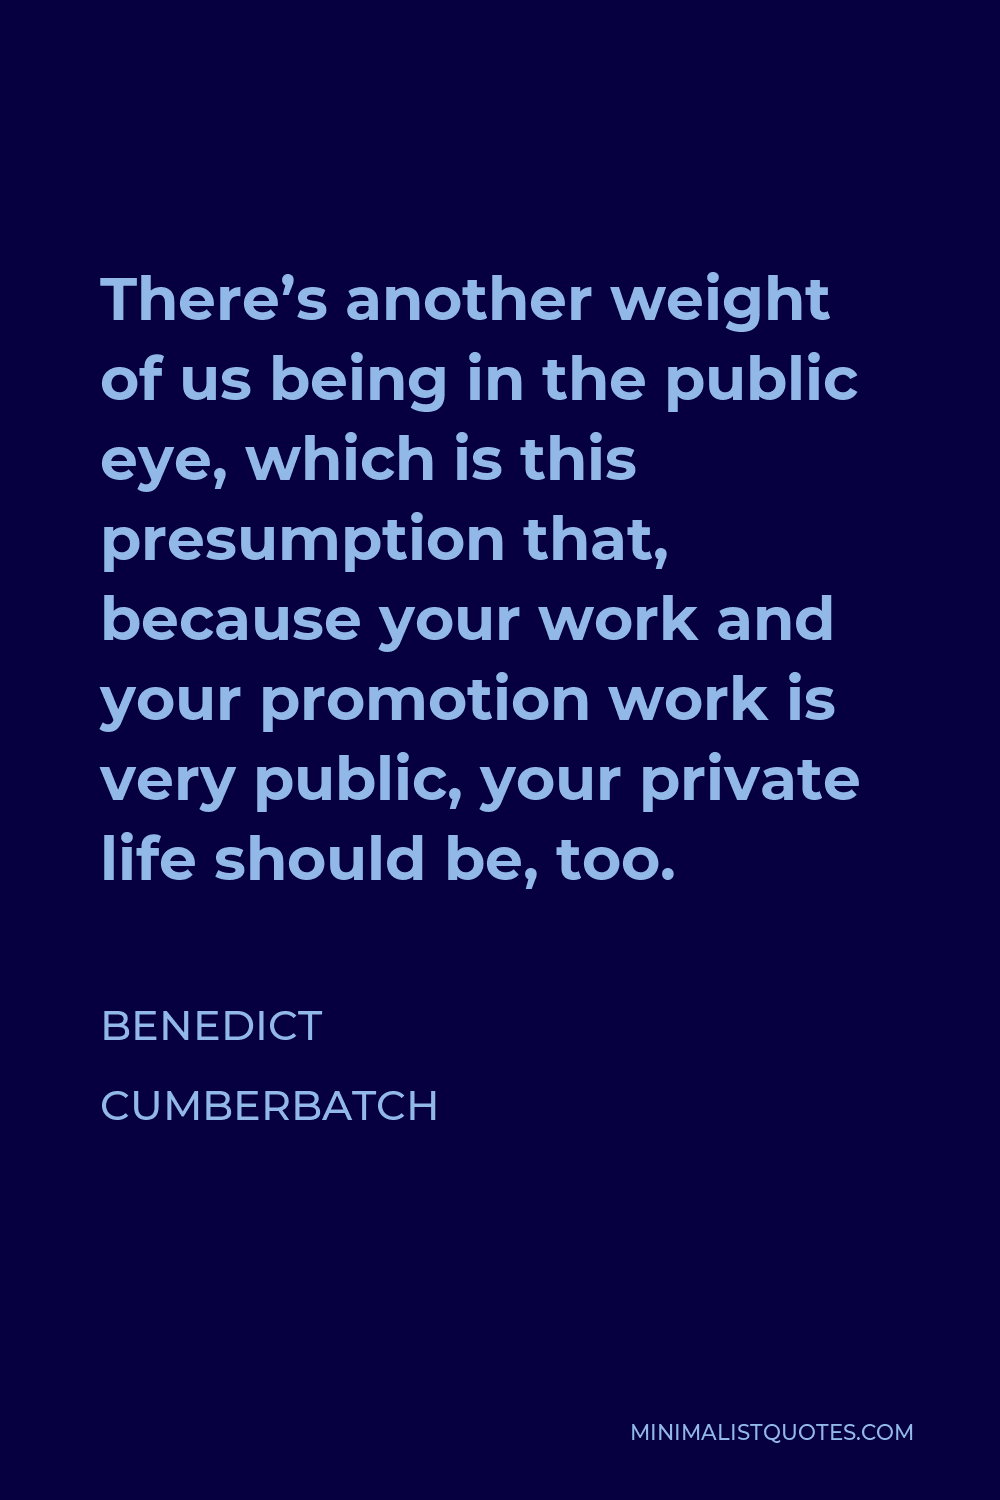 Benedict Cumberbatch Quote - There’s another weight of us being in the public eye, which is this presumption that, because your work and your promotion work is very public, your private life should be, too.